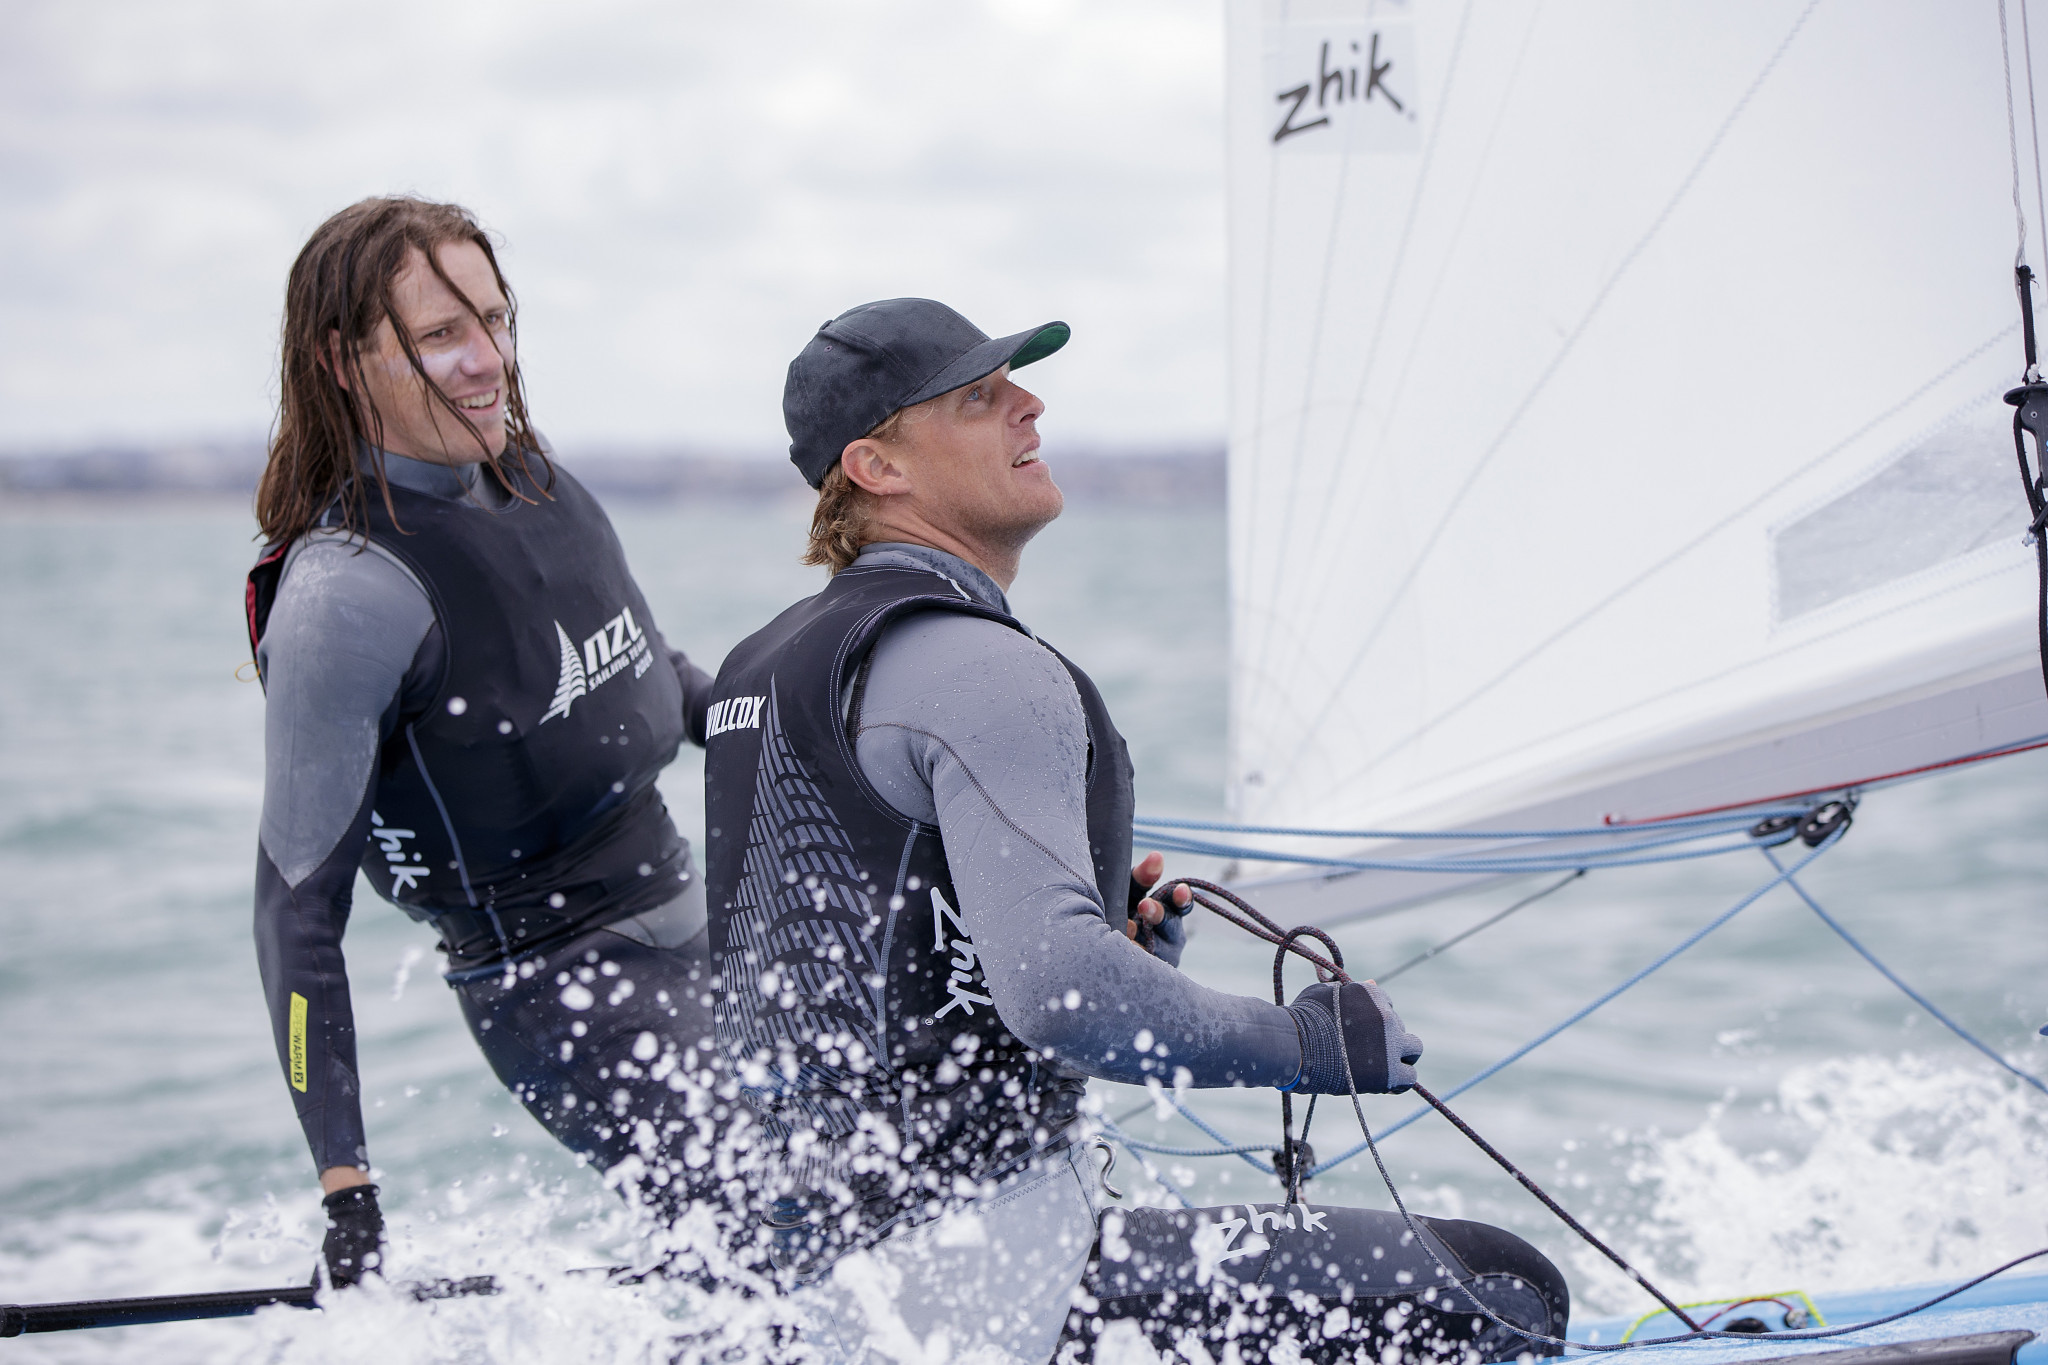 Paul Snow-Hansen and Dan Willcox have brought New Zealand's sailing team to nine for Tokyo 2020 ©Getty Images